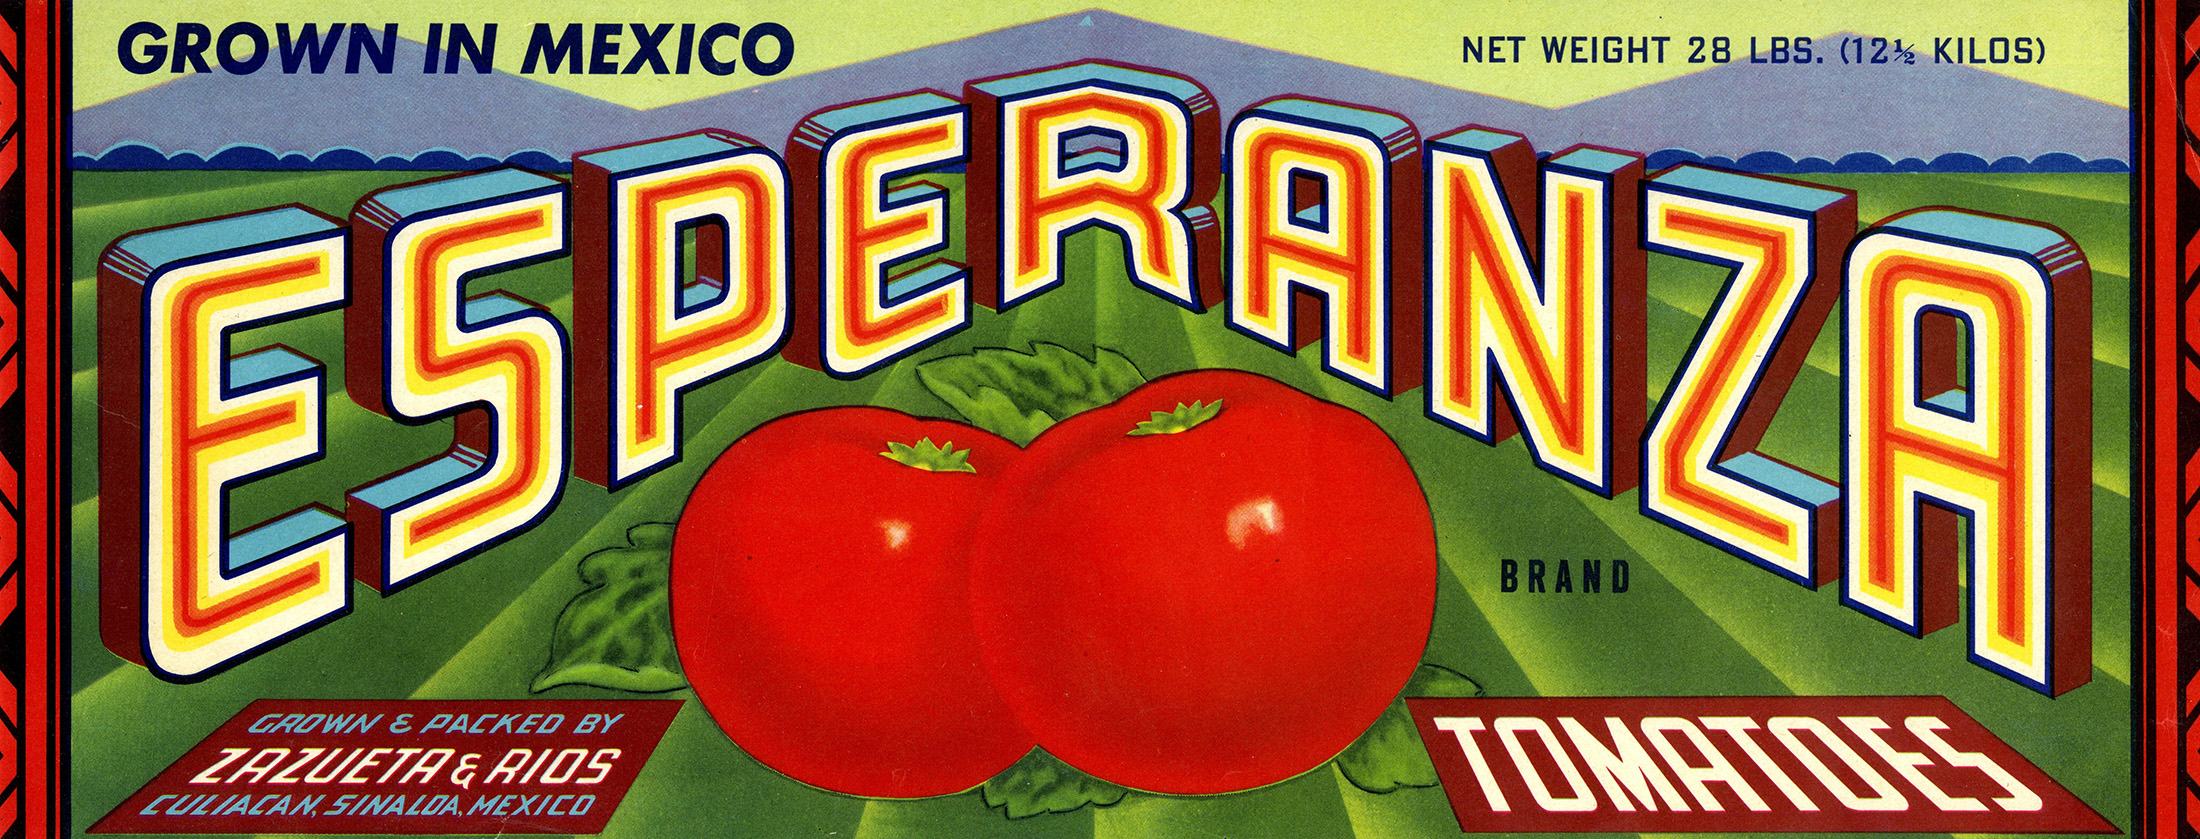 Illustrated produce label for tomatoes